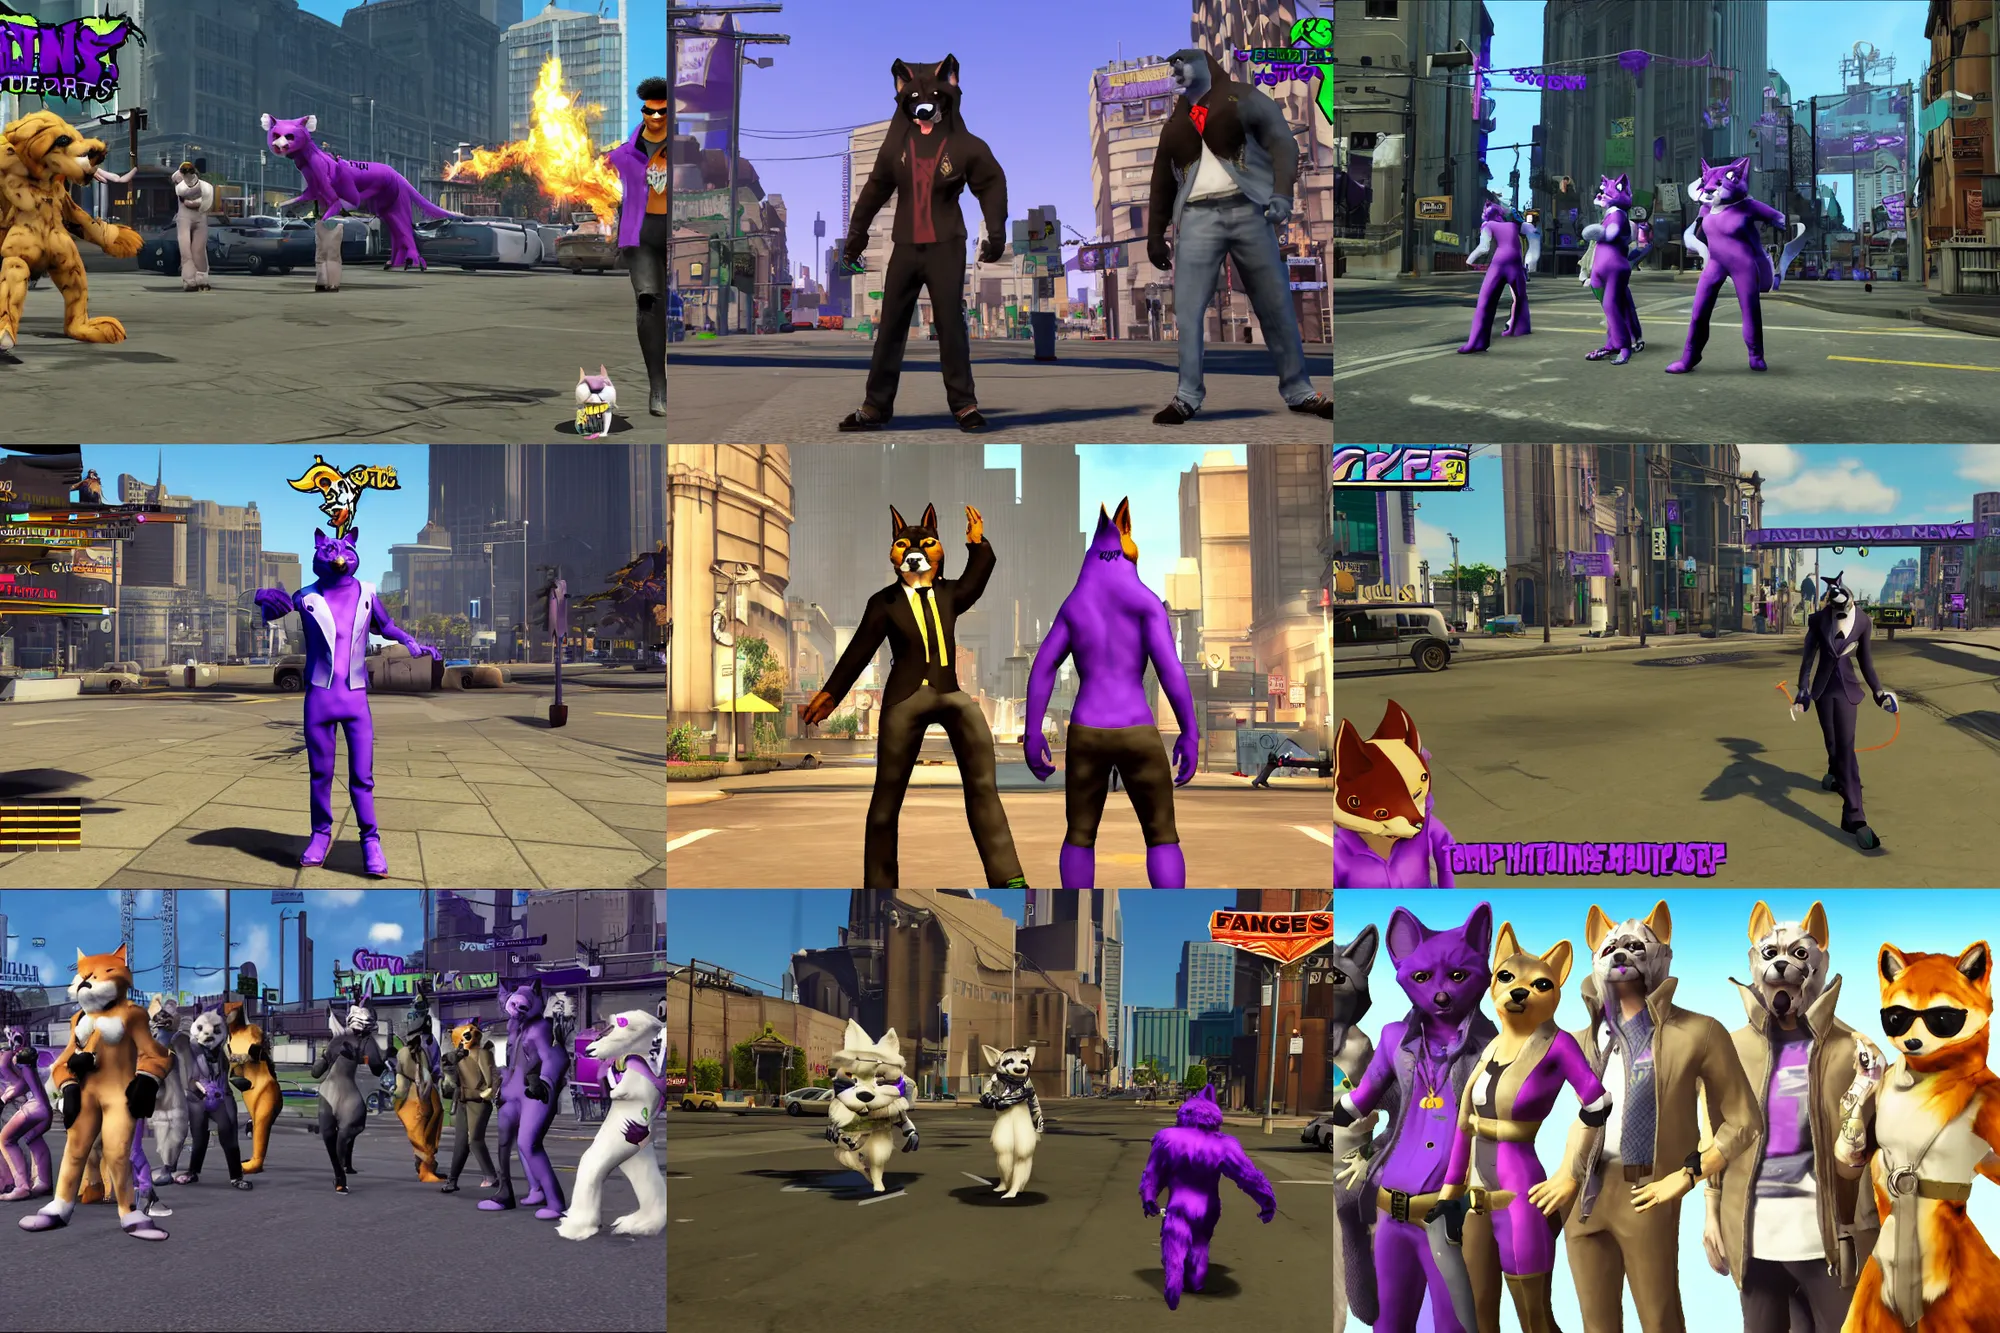 Prompt: screenshot, saints row fursuit tails mod, furries wearing tails, referencing city of villains pc game